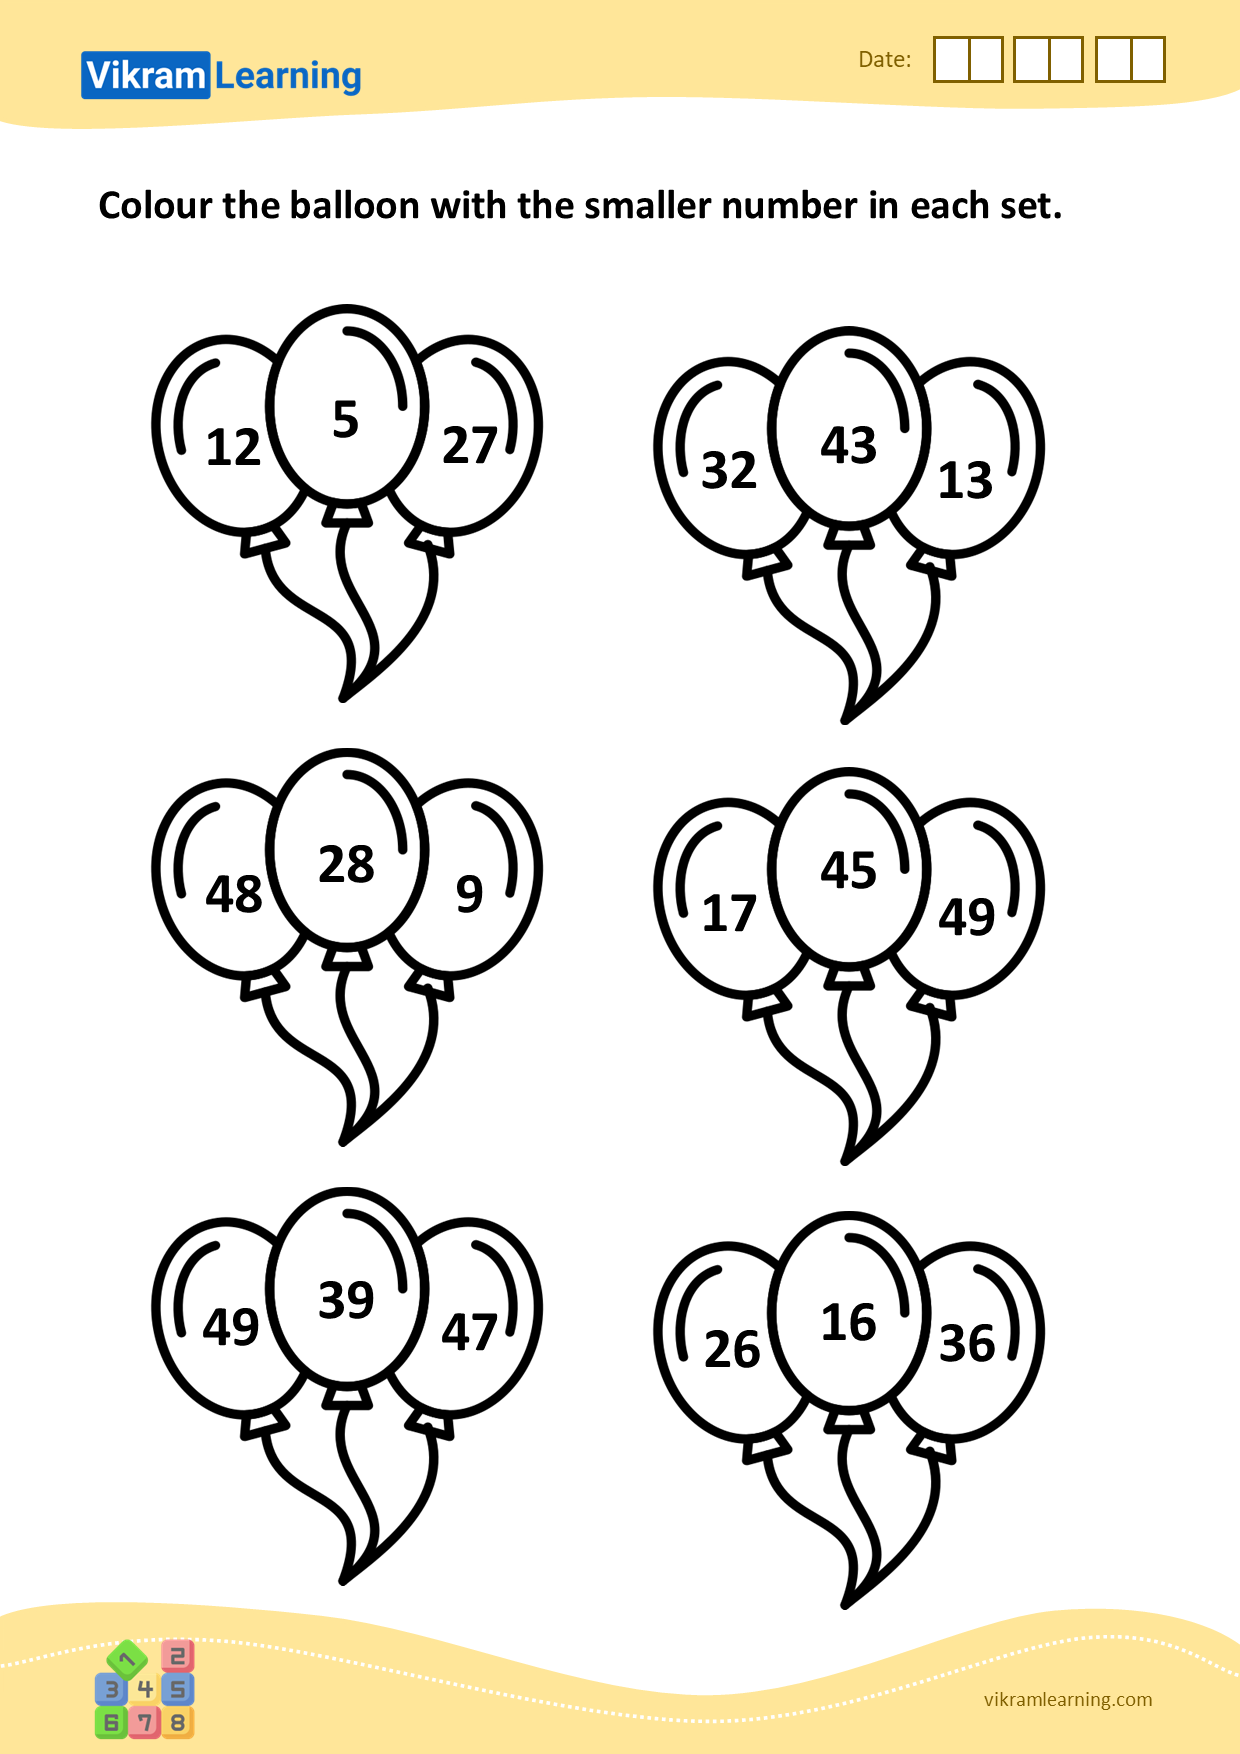 download-colour-the-balloon-with-the-smaller-number-in-each-set-worksheets-vikramlearning